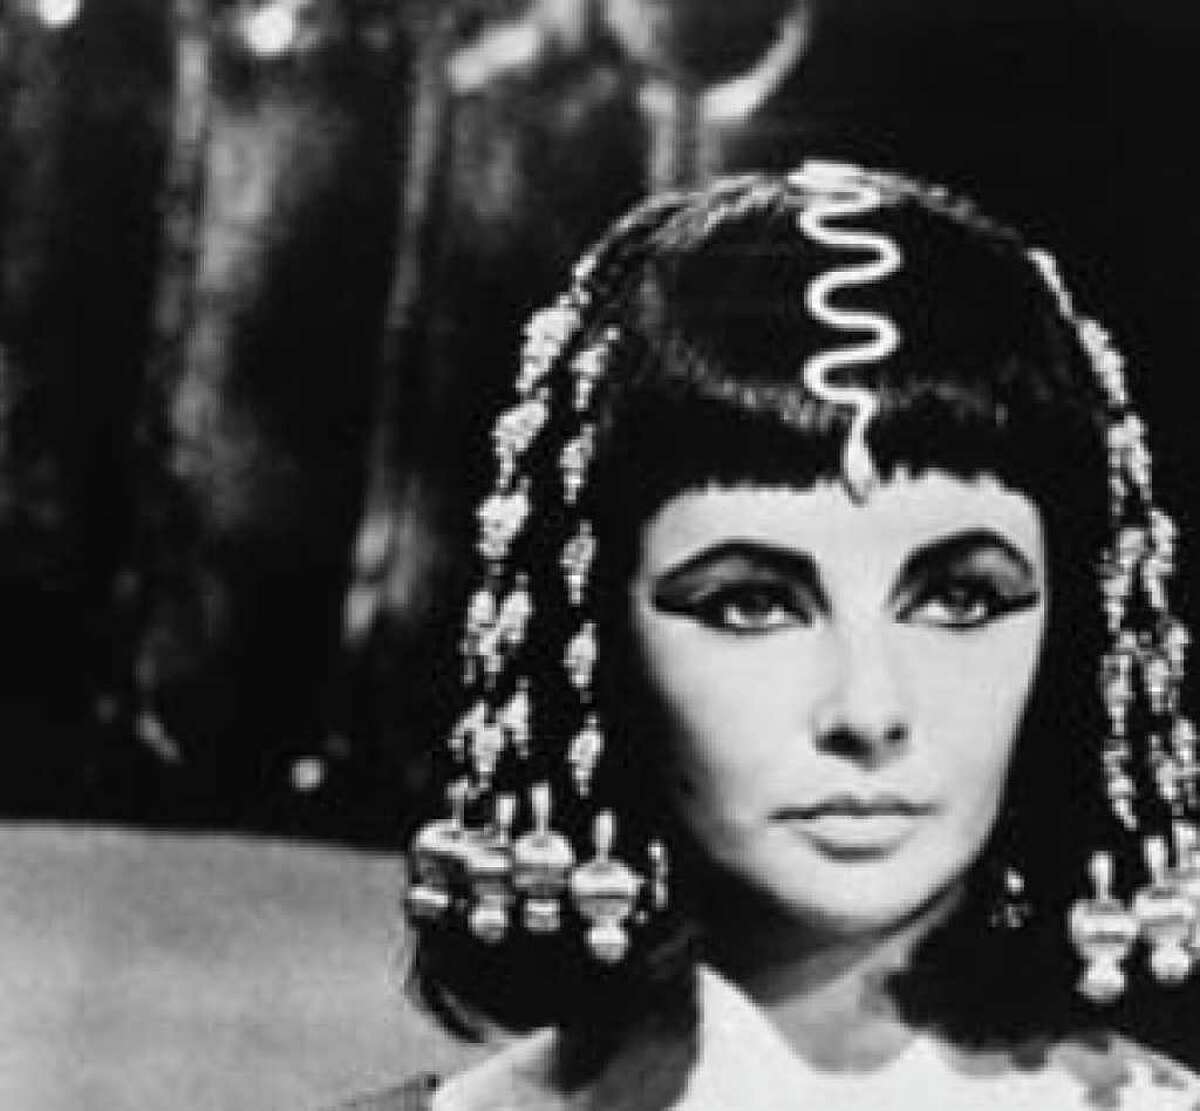 Elizabeth Taylor had the title role in the overblown, costly 1963 flop "Cleopatra."